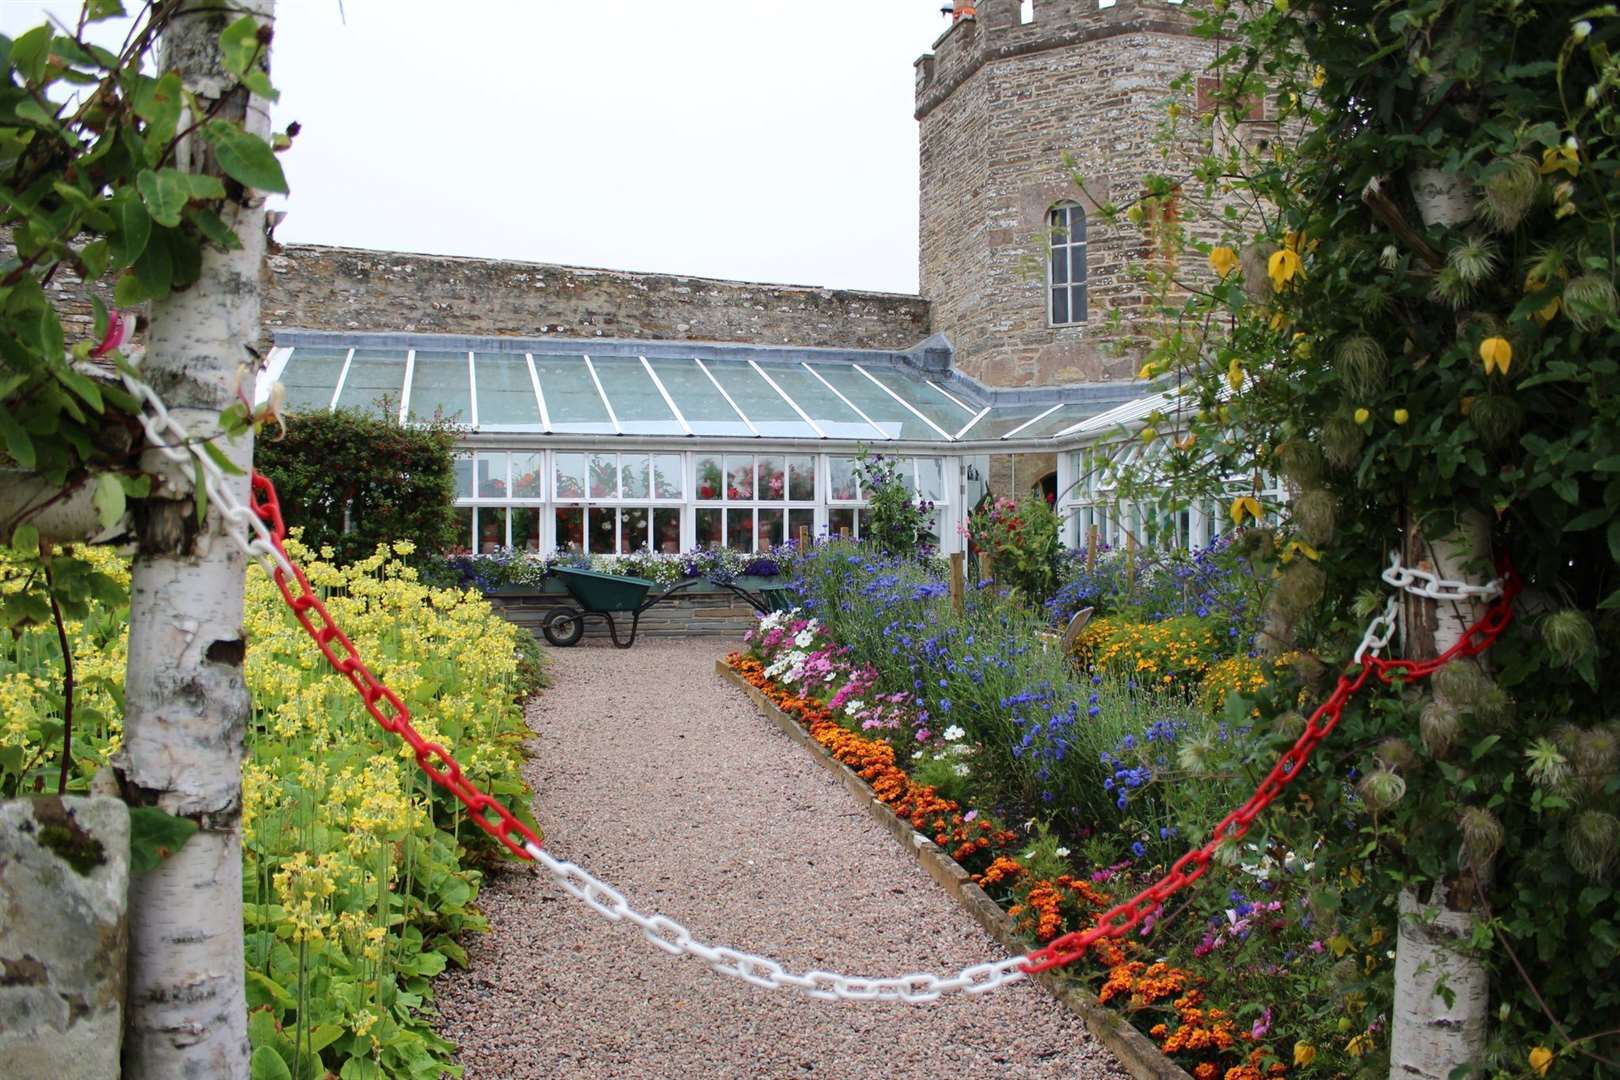 Colourful borders line the path down to the glasshouse in the Gardens of Mey.